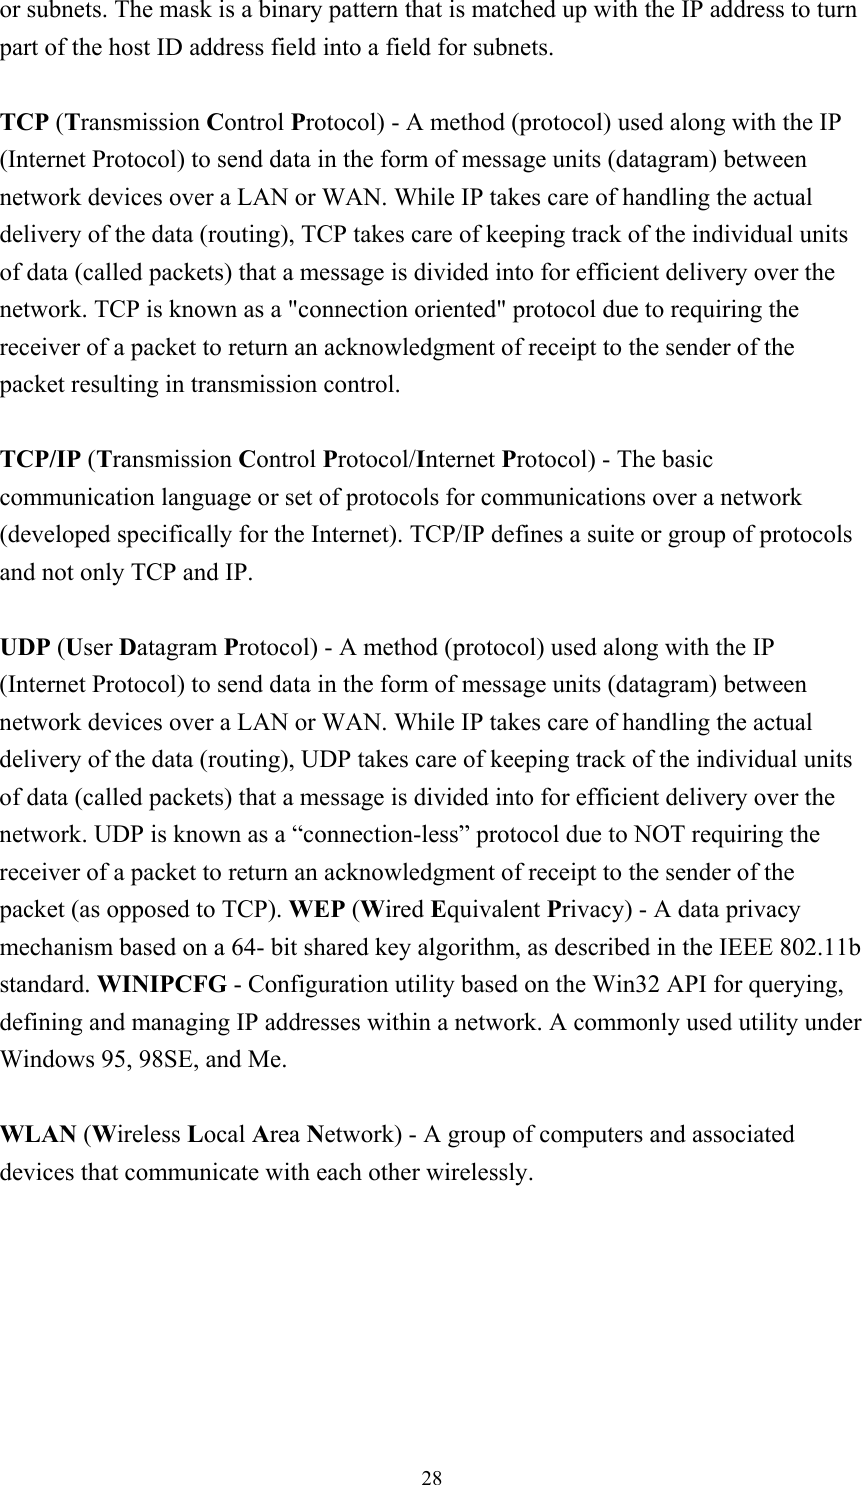  28or subnets. The mask is a binary pattern that is matched up with the IP address to turn part of the host ID address field into a field for subnets.    TCP (Transmission Control Protocol) - A method (protocol) used along with the IP (Internet Protocol) to send data in the form of message units (datagram) between network devices over a LAN or WAN. While IP takes care of handling the actual delivery of the data (routing), TCP takes care of keeping track of the individual units of data (called packets) that a message is divided into for efficient delivery over the network. TCP is known as a &quot;connection oriented&quot; protocol due to requiring the receiver of a packet to return an acknowledgment of receipt to the sender of the packet resulting in transmission control.  TCP/IP (Transmission Control Protocol/Internet Protocol) - The basic communication language or set of protocols for communications over a network (developed specifically for the Internet). TCP/IP defines a suite or group of protocols and not only TCP and IP.  UDP (User Datagram Protocol) - A method (protocol) used along with the IP (Internet Protocol) to send data in the form of message units (datagram) between network devices over a LAN or WAN. While IP takes care of handling the actual delivery of the data (routing), UDP takes care of keeping track of the individual units of data (called packets) that a message is divided into for efficient delivery over the network. UDP is known as a “connection-less” protocol due to NOT requiring the receiver of a packet to return an acknowledgment of receipt to the sender of the packet (as opposed to TCP). WEP (Wired Equivalent Privacy) - A data privacy mechanism based on a 64- bit shared key algorithm, as described in the IEEE 802.11b standard. WINIPCFG - Configuration utility based on the Win32 API for querying, defining and managing IP addresses within a network. A commonly used utility under Windows 95, 98SE, and Me.  WLAN (Wireless Local Area Network) - A group of computers and associated devices that communicate with each other wirelessly.  